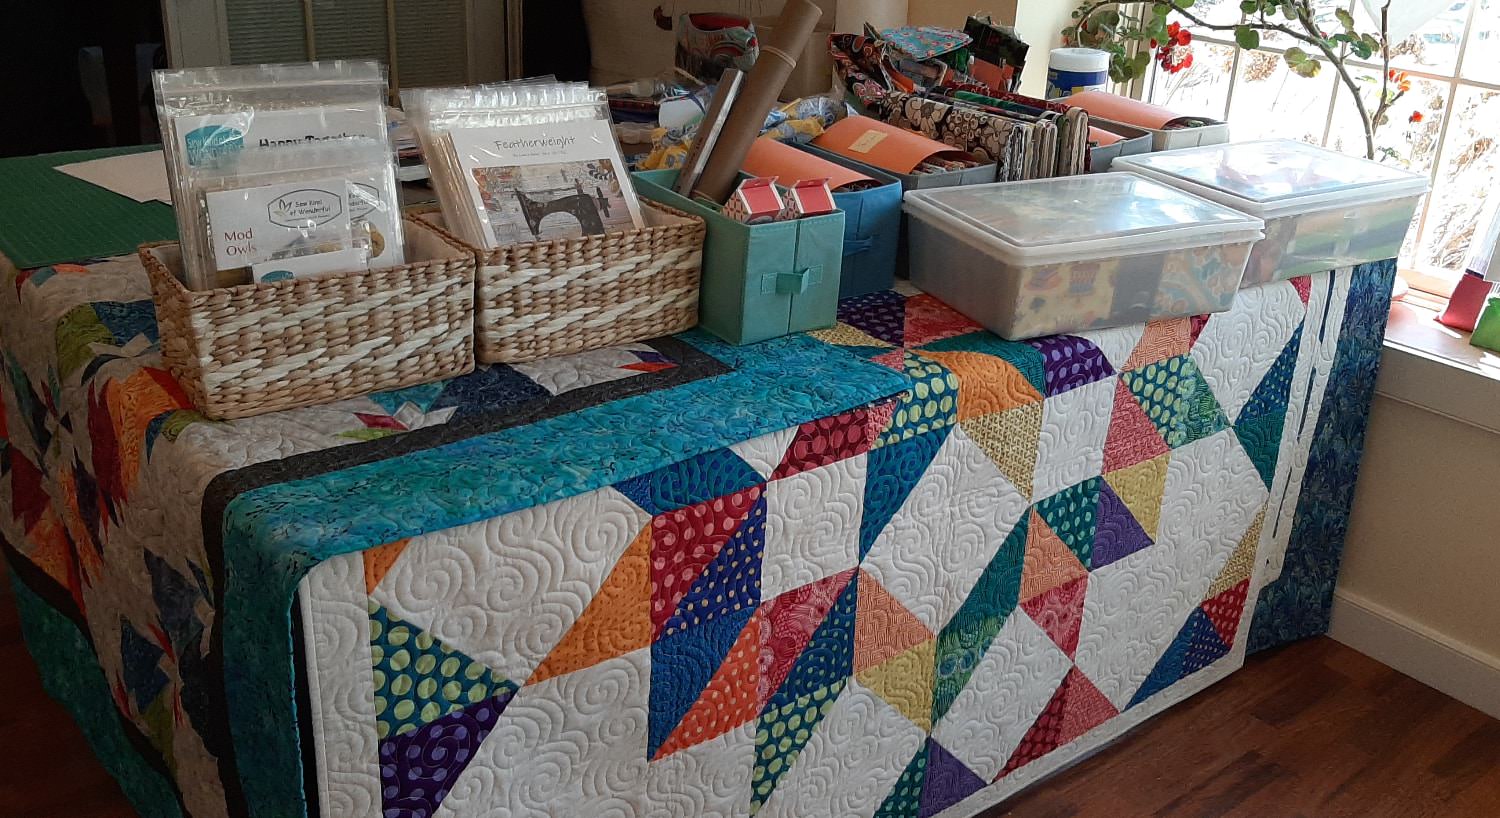 Tables covered in multicolored quilts with baskets and plastic boxes storing quilting supplies on top of the tables